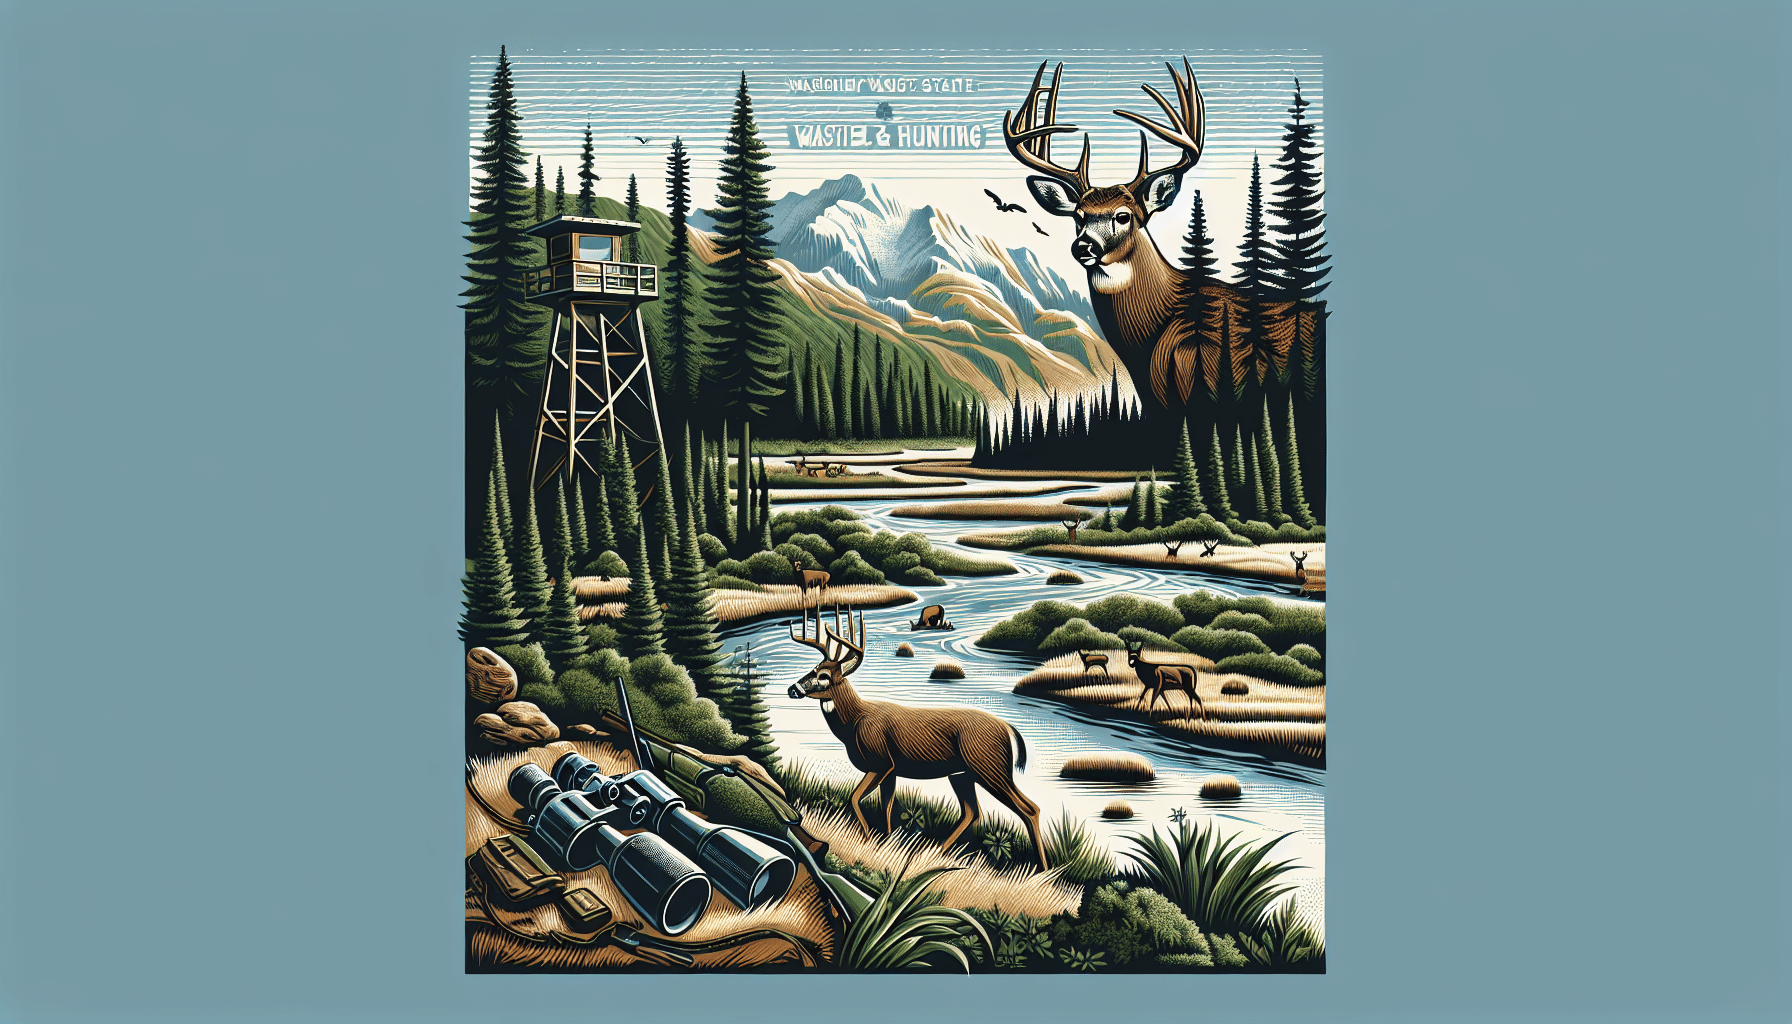 An illustration showing the majestic landscapes of Washington State perfect for deer hunting. Include the diversity of the terrain, highlighting lush forests, meandering rivers, and rugged mountains. Visualize deer in their natural habitat, possibly near a water source or under the tall trees. Be sure to subtly imply the presence of hunters by including elements like distant watch towers, camouflage tents hidden among the trees, and binoculars lying on a rock. Remember, it's crucial to avoid illustrating people, text, brand names, and logos.